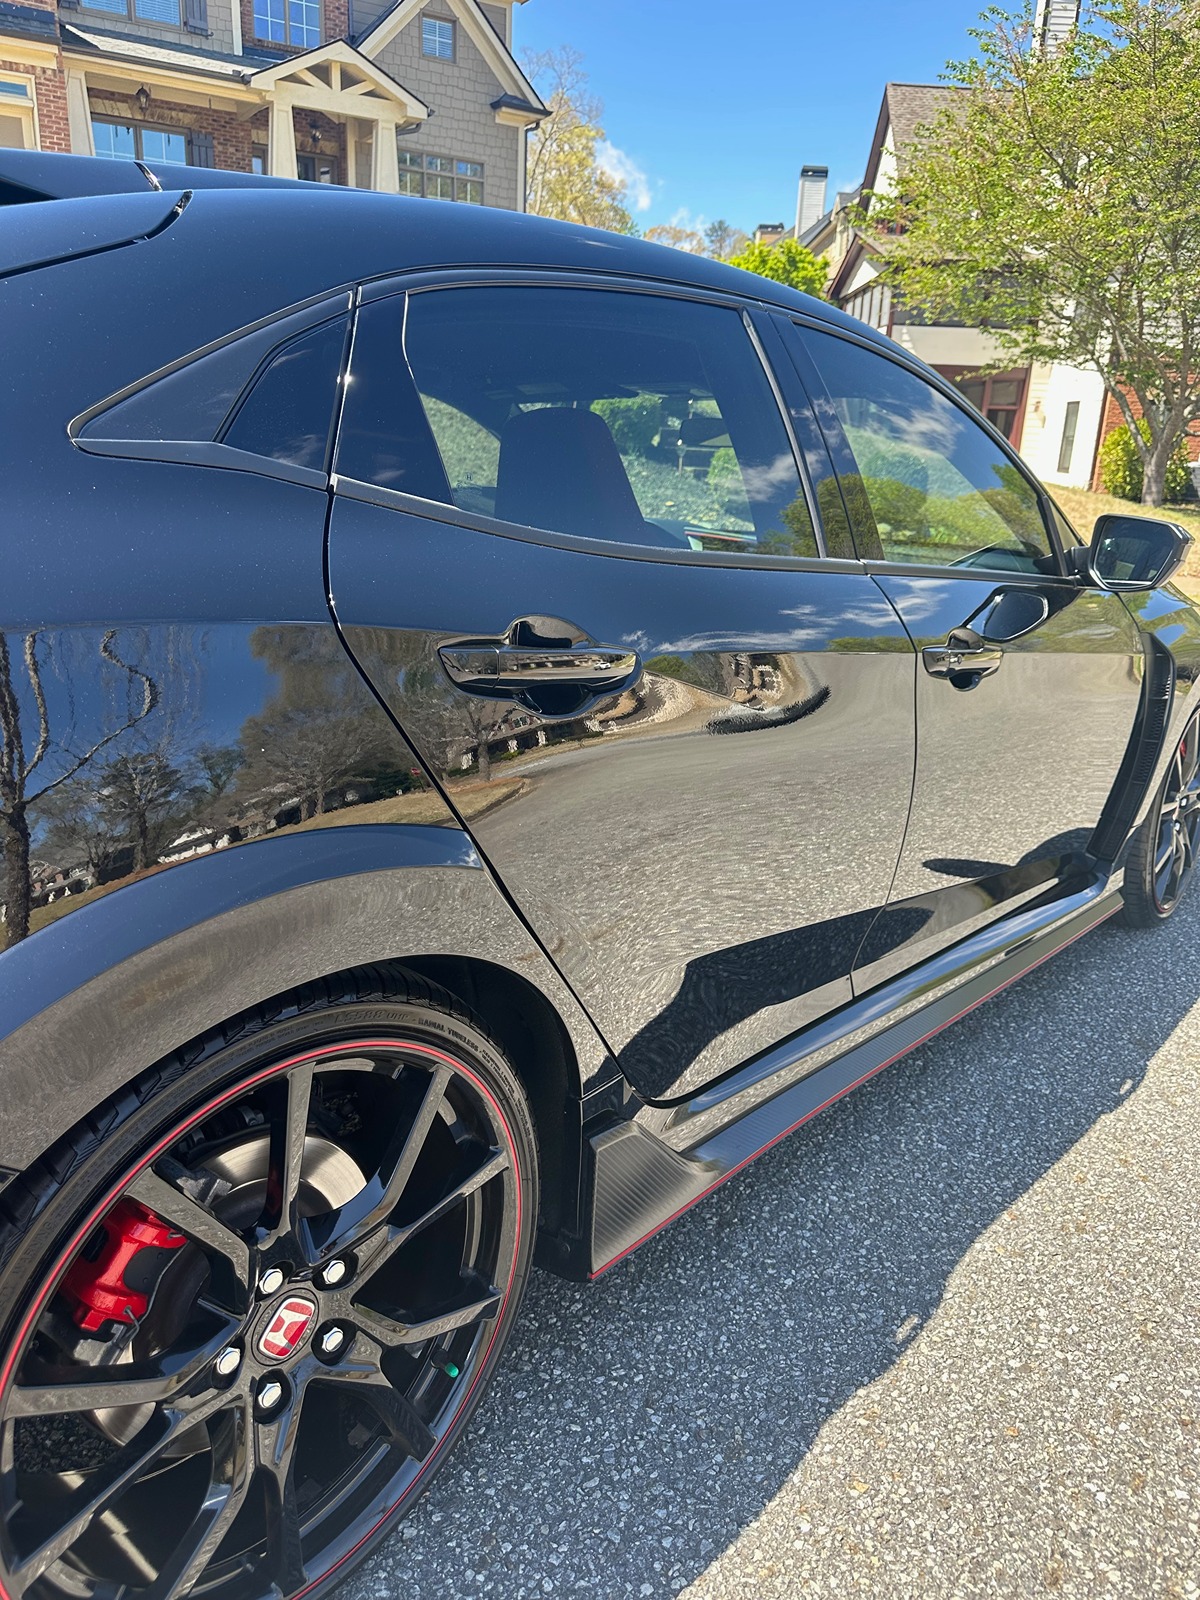 Honda Civic 10th gen Sold. 2019 Civic Type R for sale IMG_8134